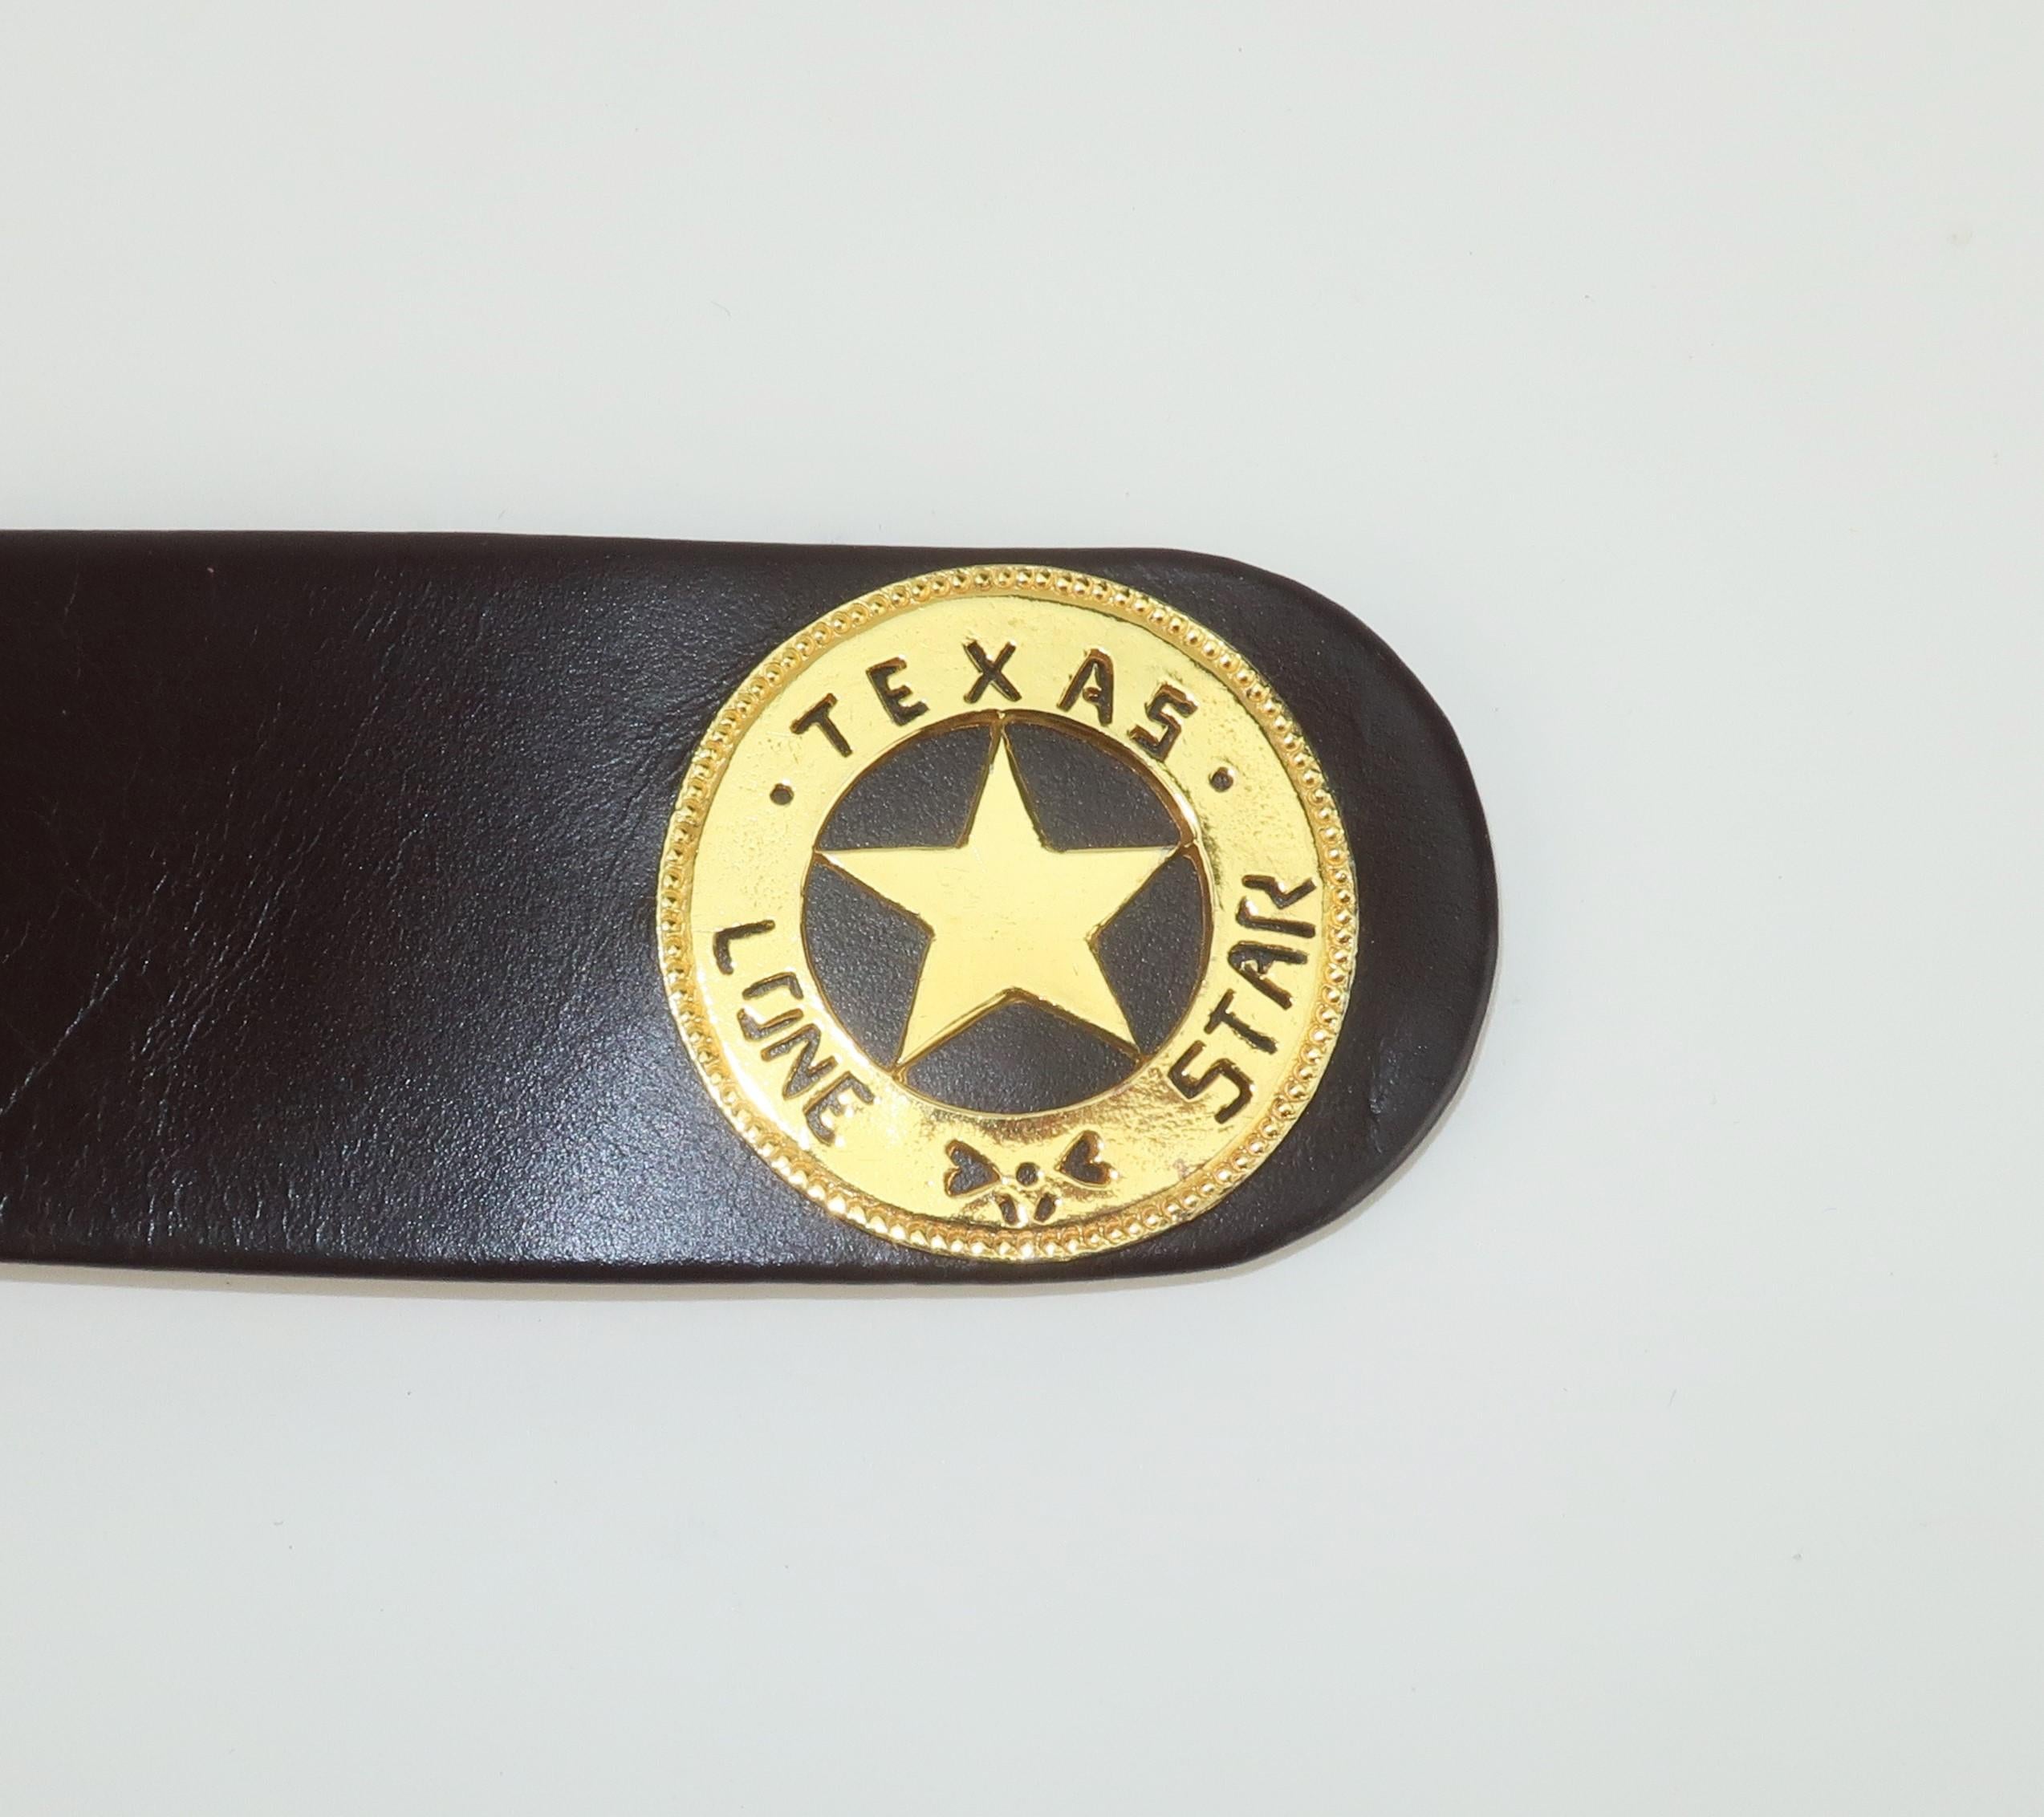 Neiman Marcus Texas Novelty Brown Leather Belt, 1960's For Sale 4